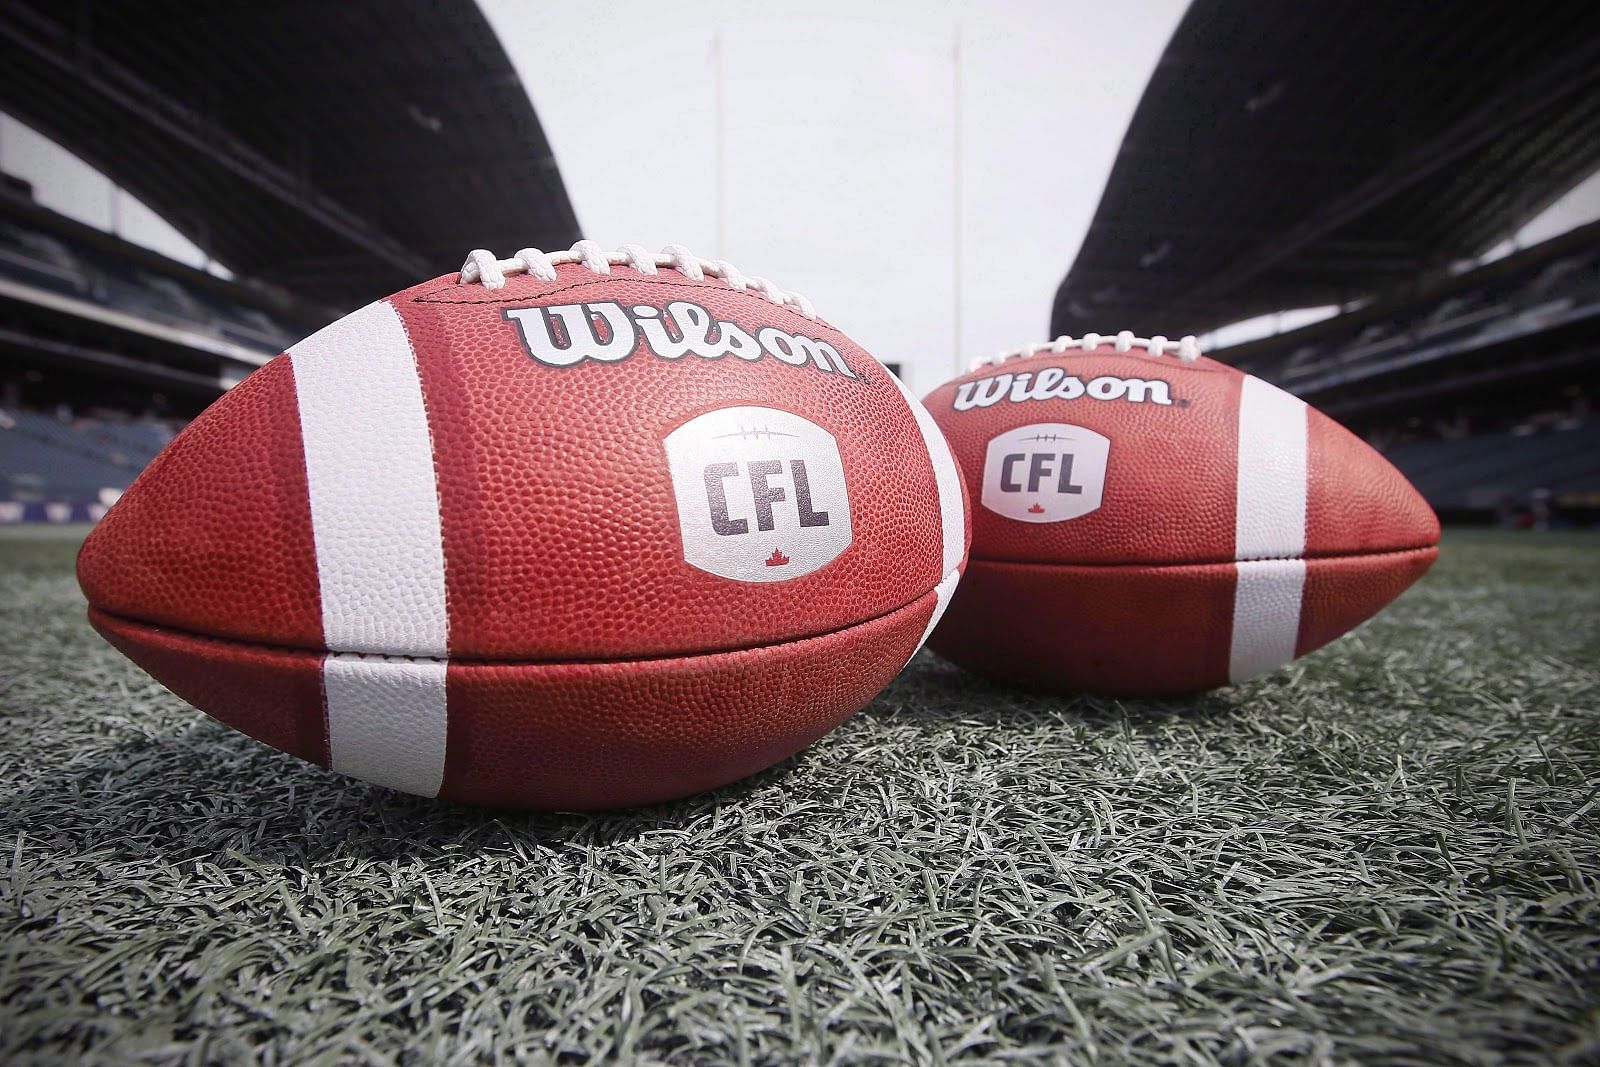 3 streaming options to watch CFL in 2023